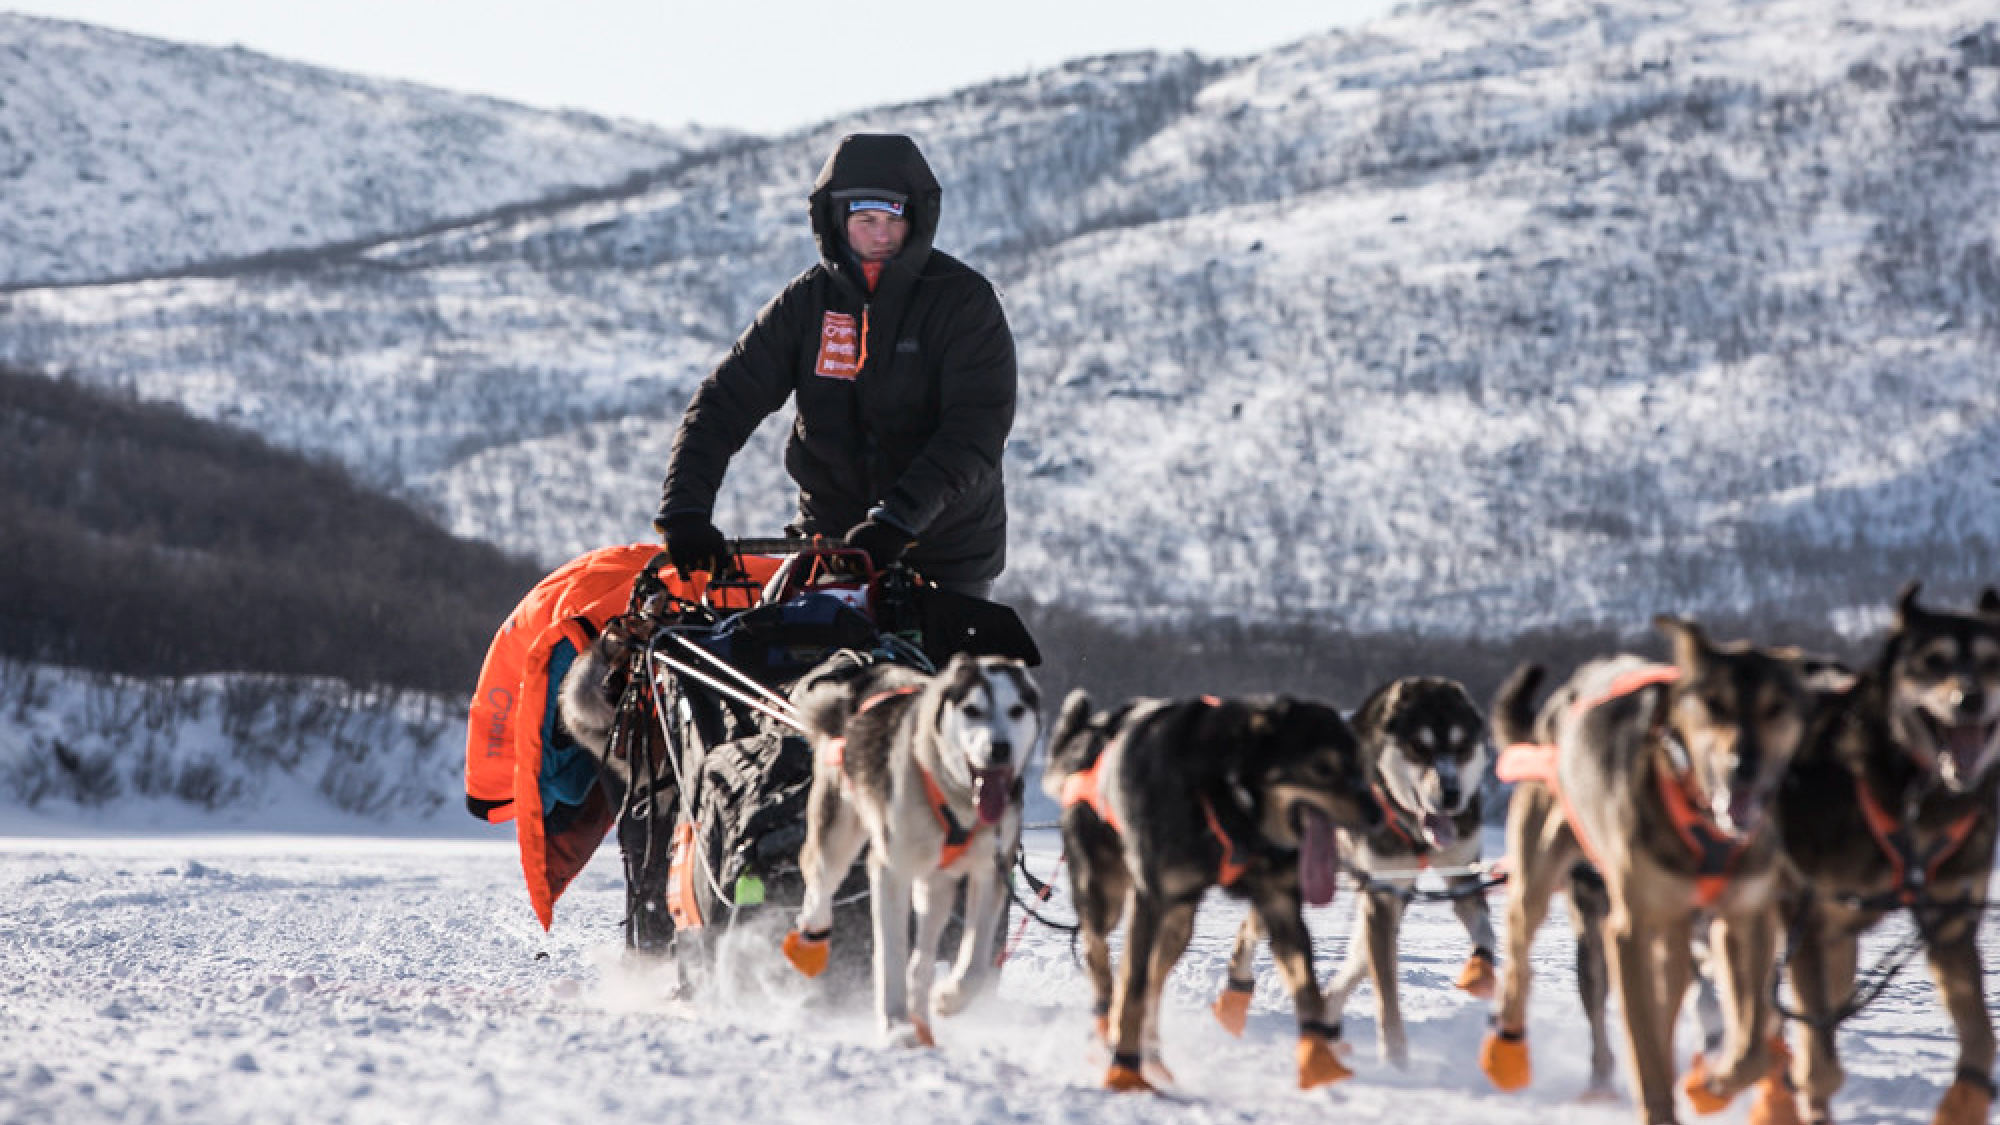 Iditarod musher Dallas Seavey with his team of dogs.